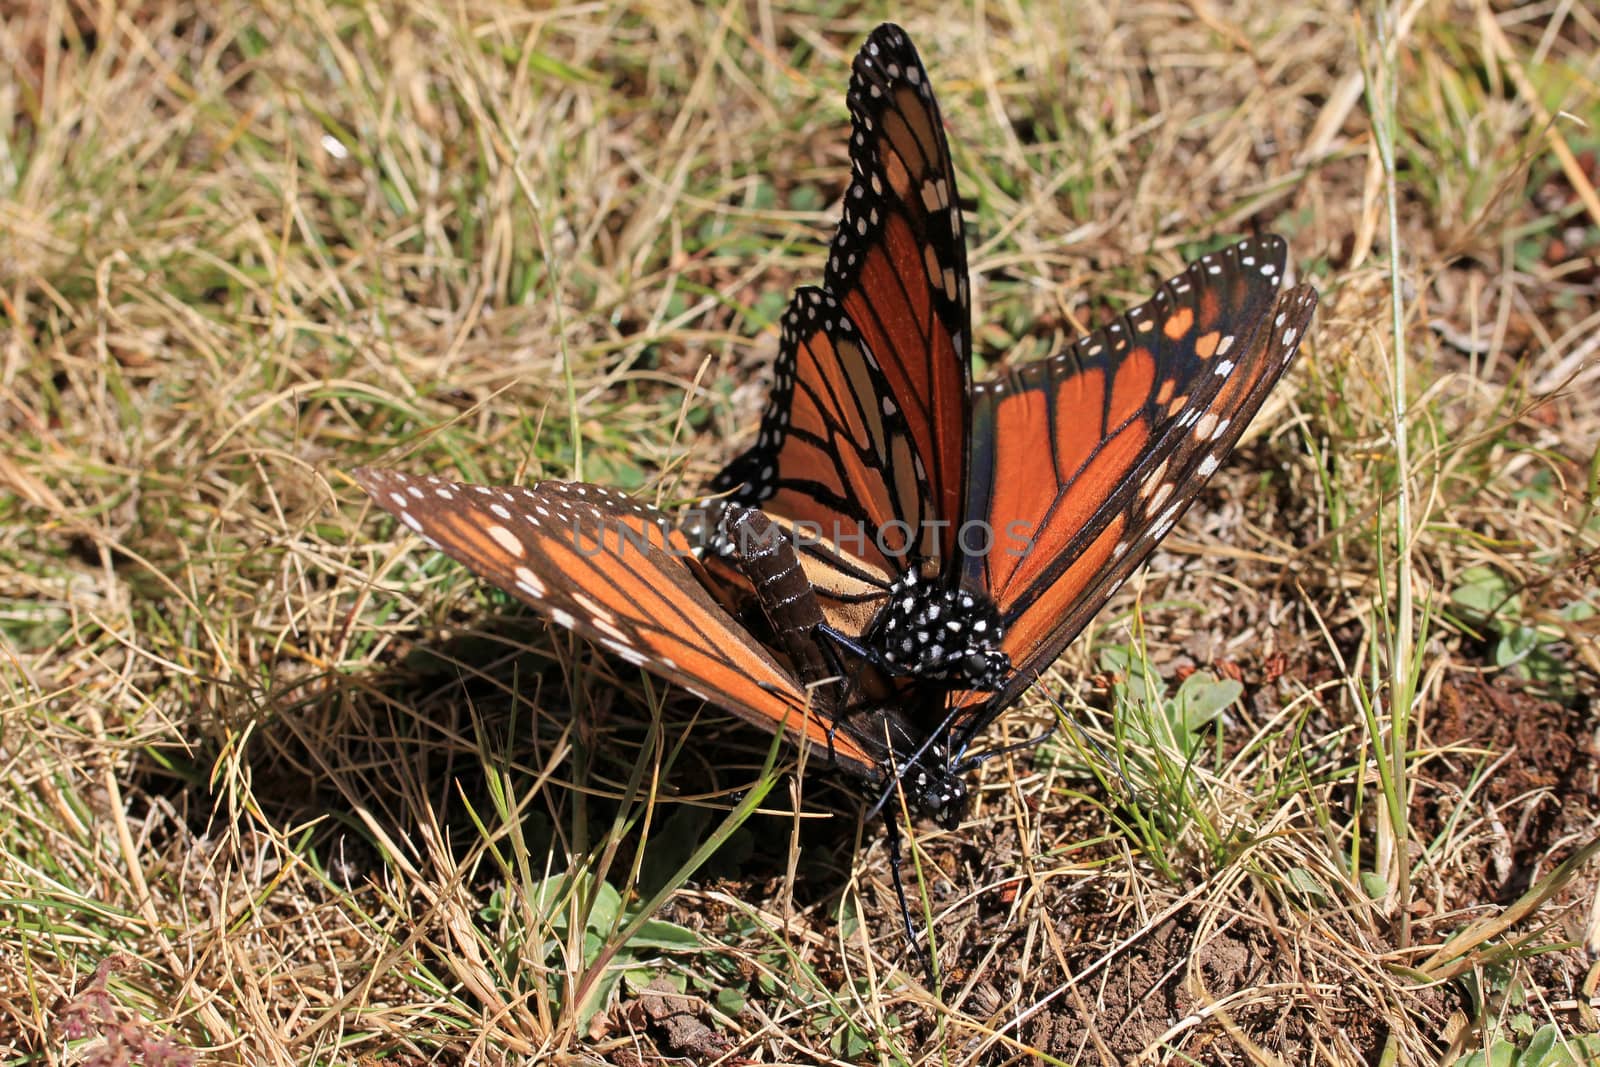 Monarch Butterflies mating in Michoacan, Mexico, millions are migrating every year and waking up with the sun.